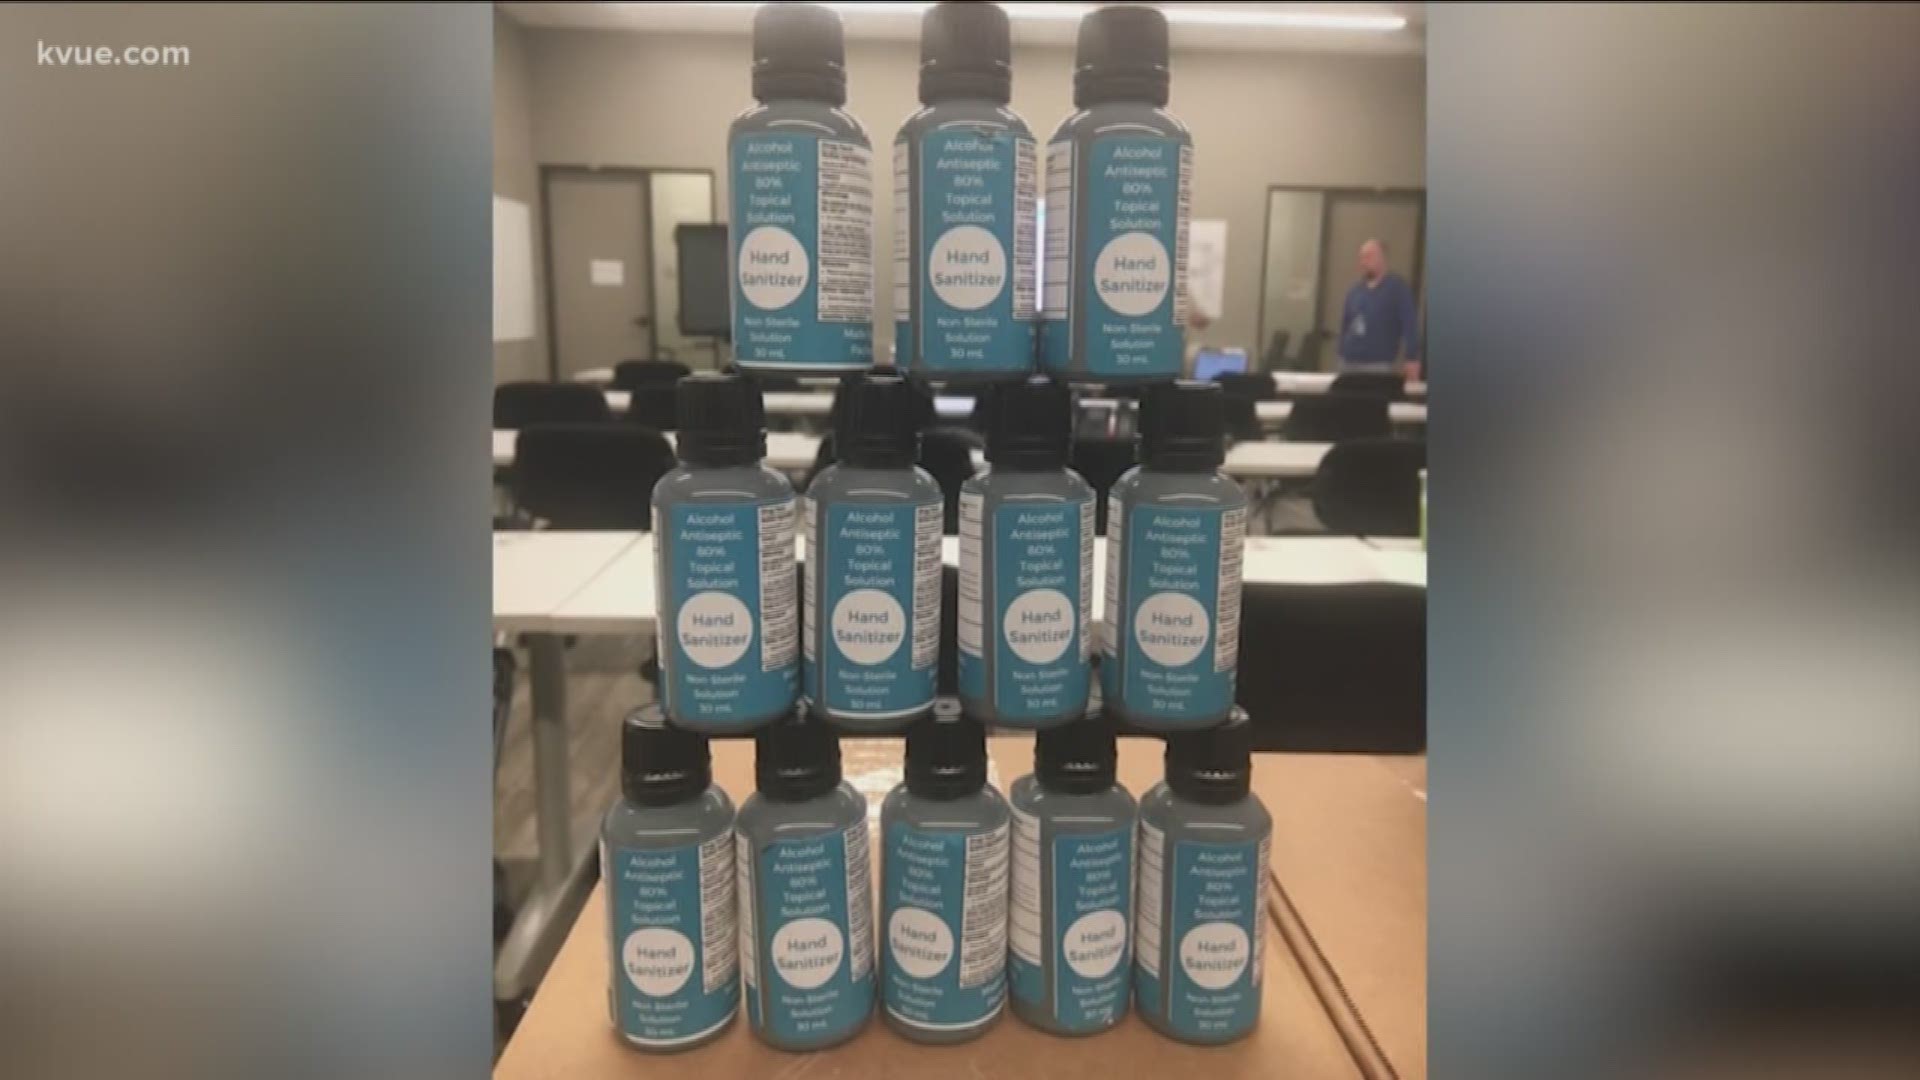 Two Smithville companies that usually make beautify products and booze are teaming up to help create something different.